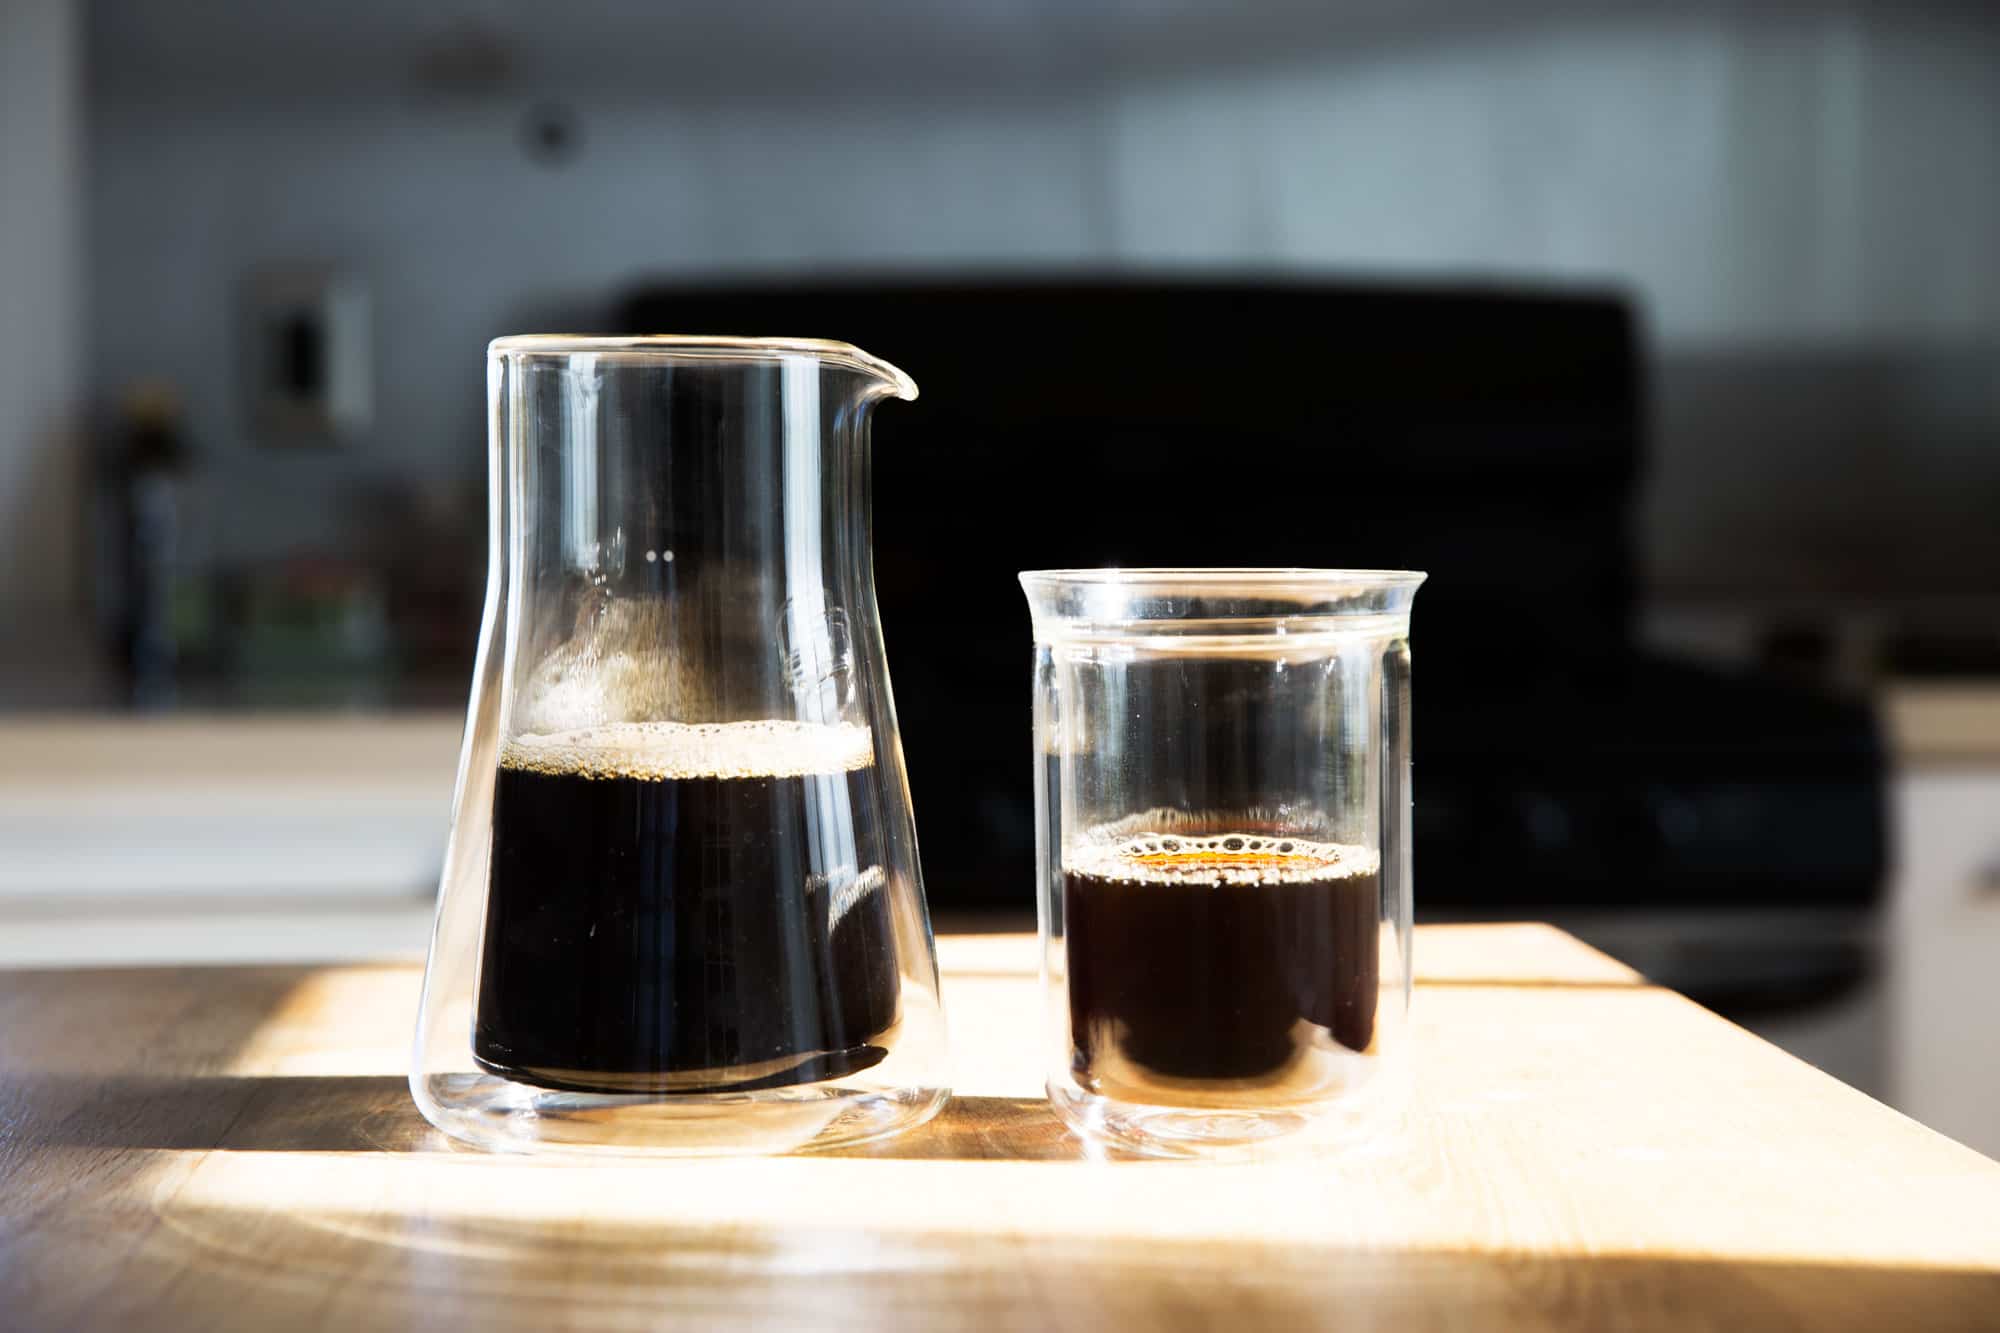 Cold Brew Ratio: The Best Coffee to Water Ratio